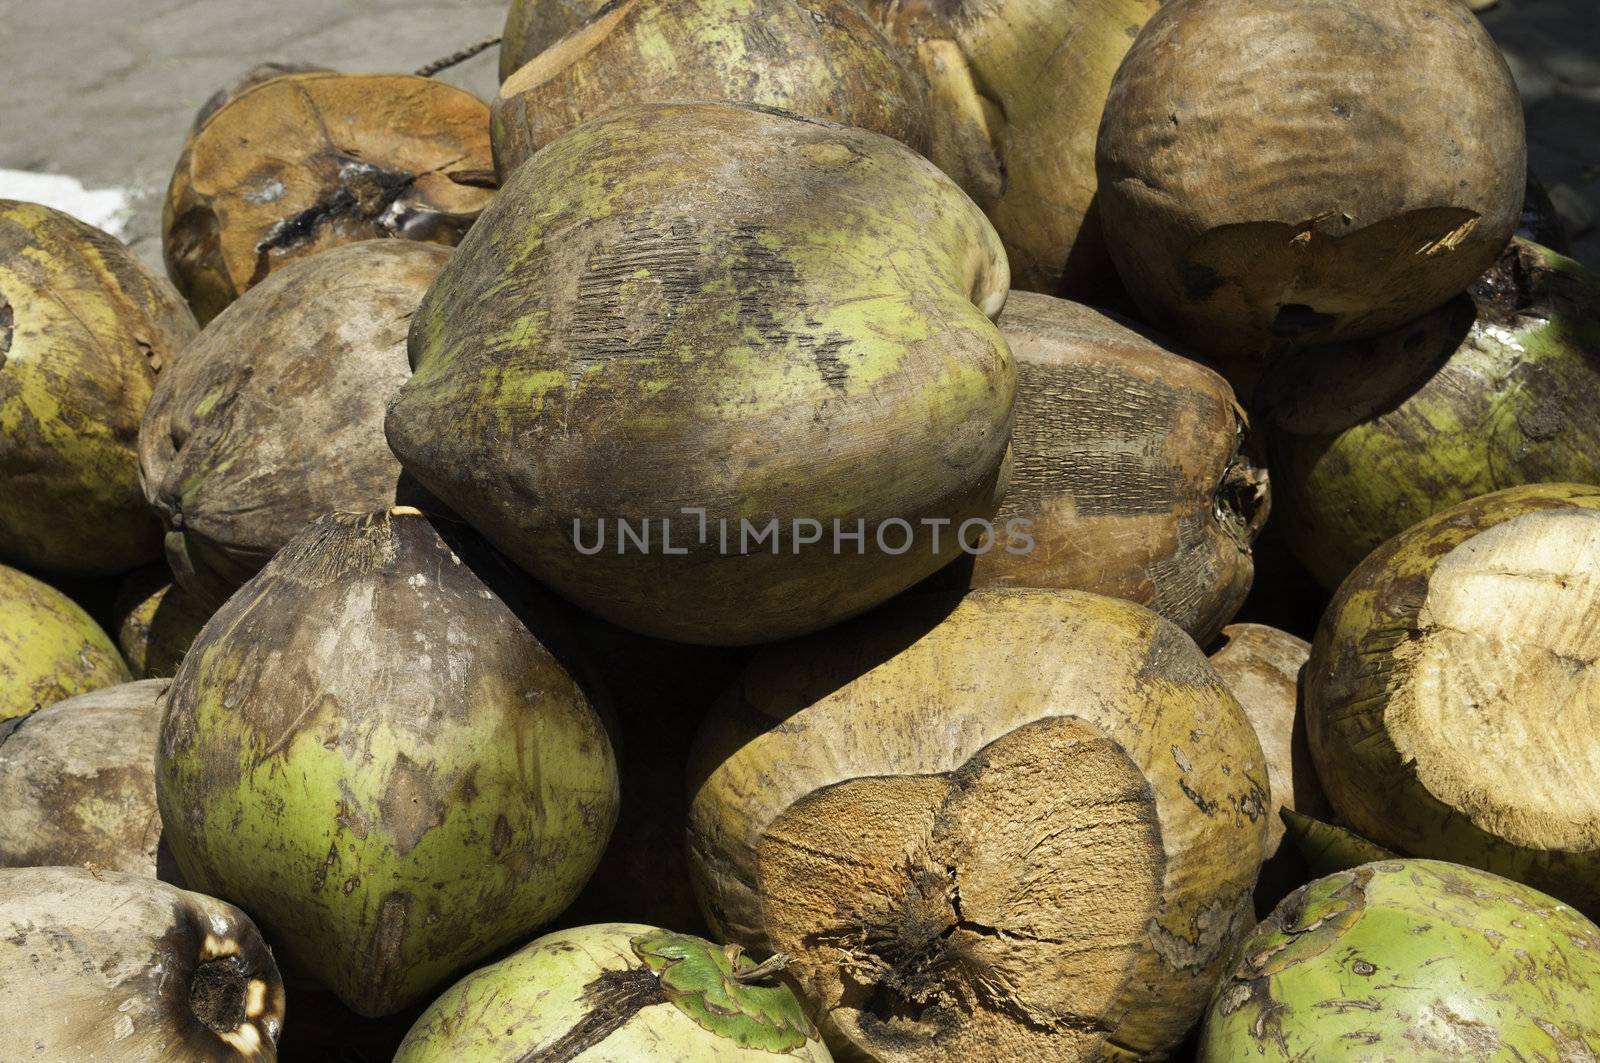 Group of indonesian coconuts by the street